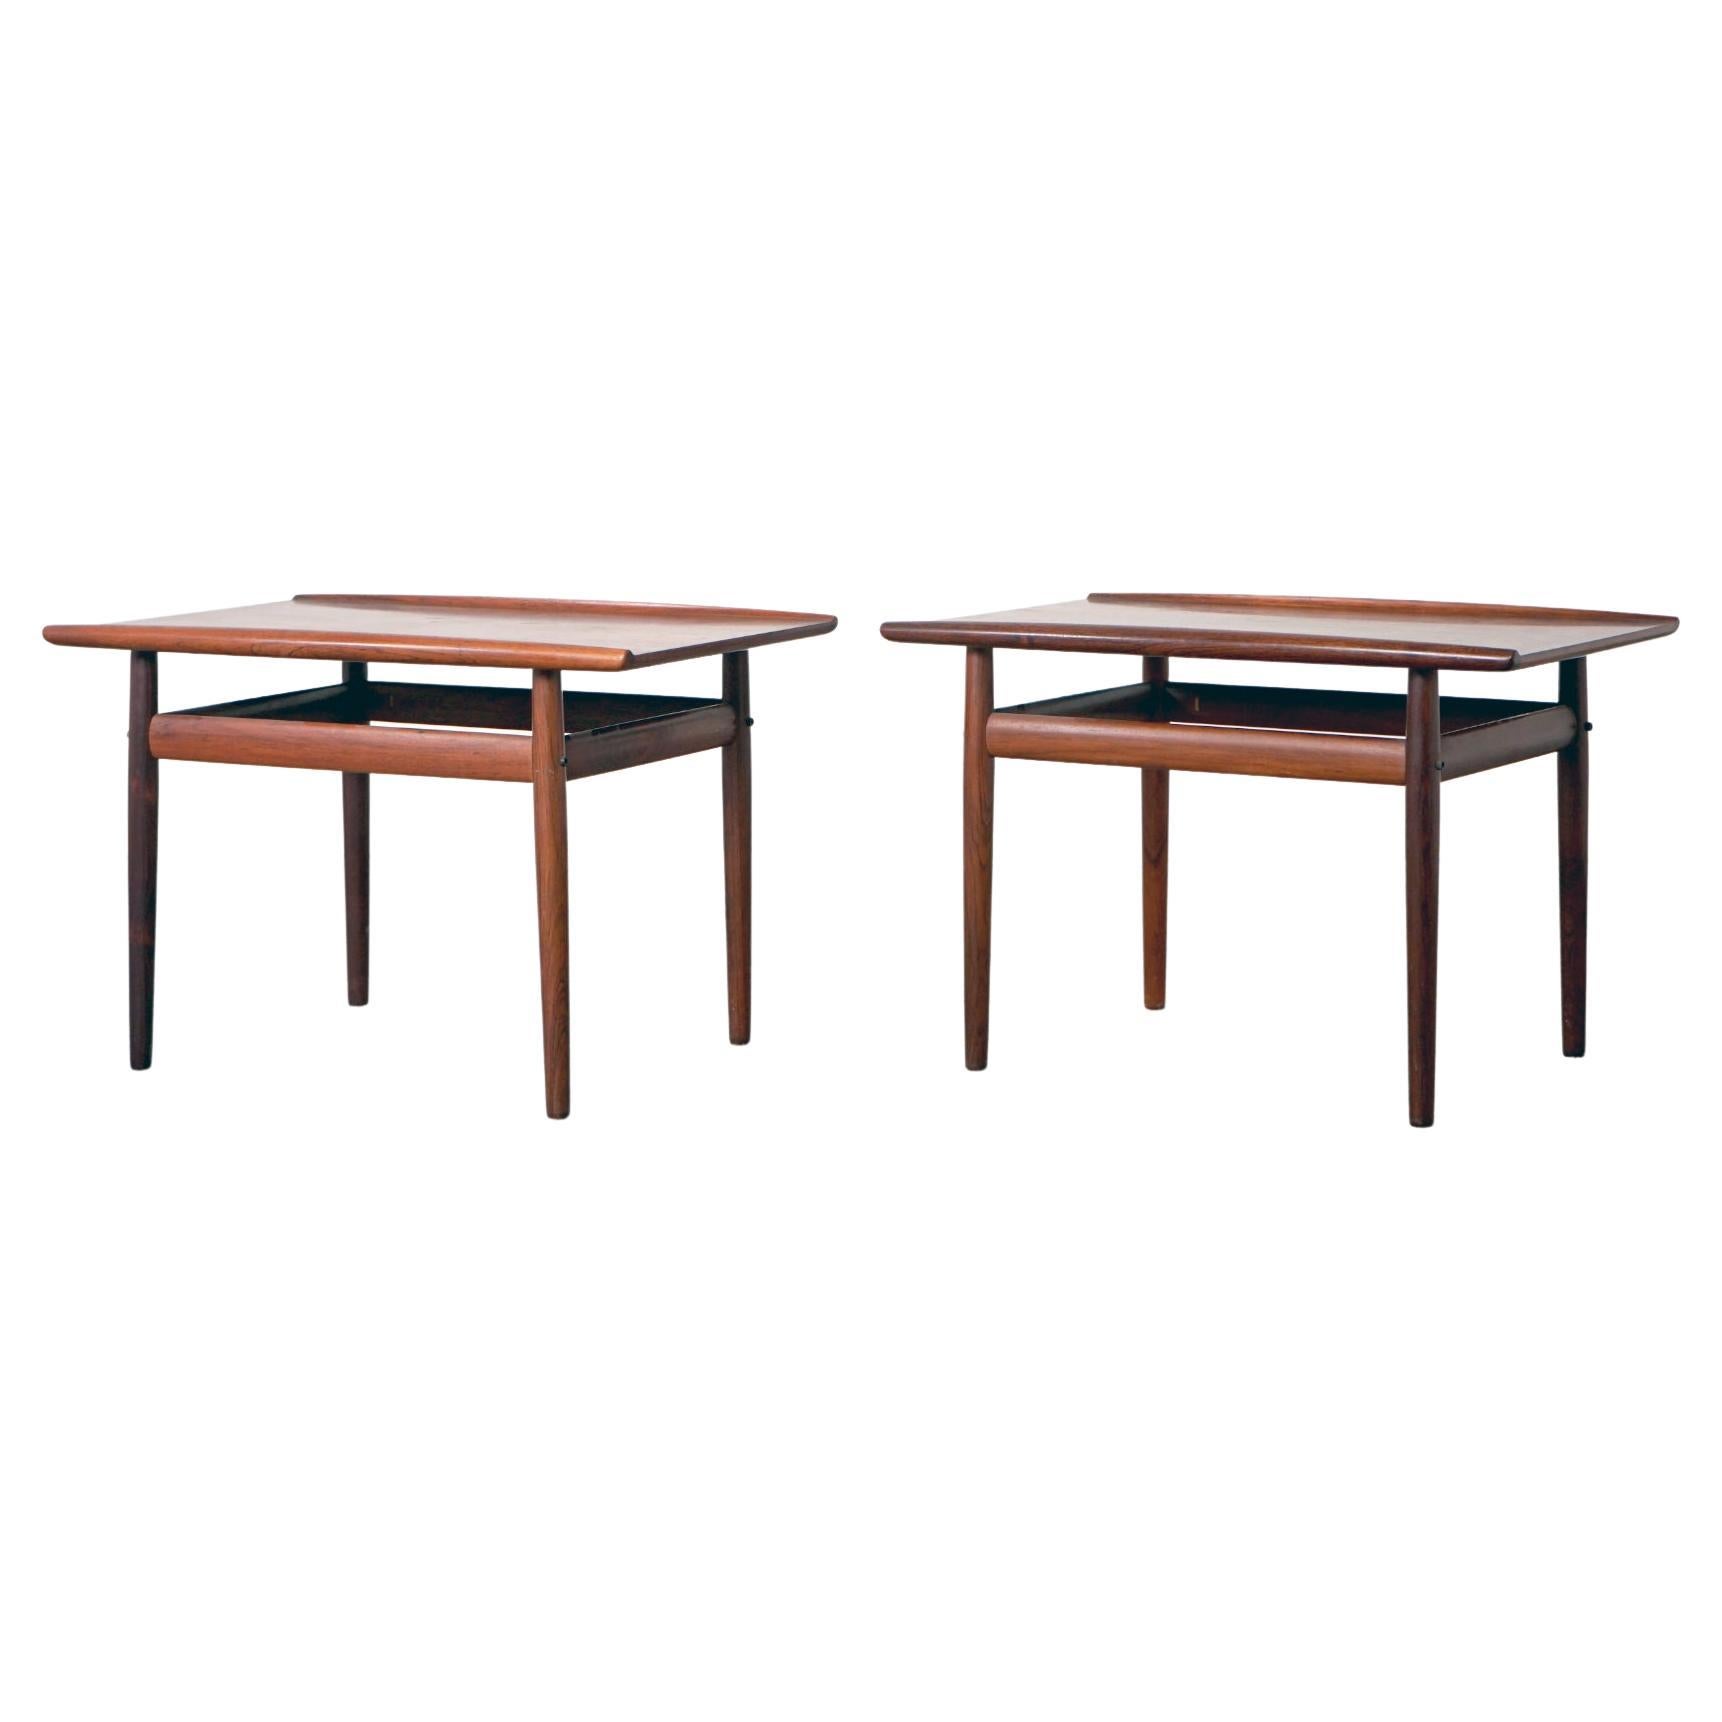 Rosewood Danish side tables by Grete Jalk for Glostrup, circa 1960's. Solid wood construction on the base and beautifully sculpted raised edges. Handsome book-matched veneer on the tops, stunning grain patterns! Underside of one table shows Glostrup